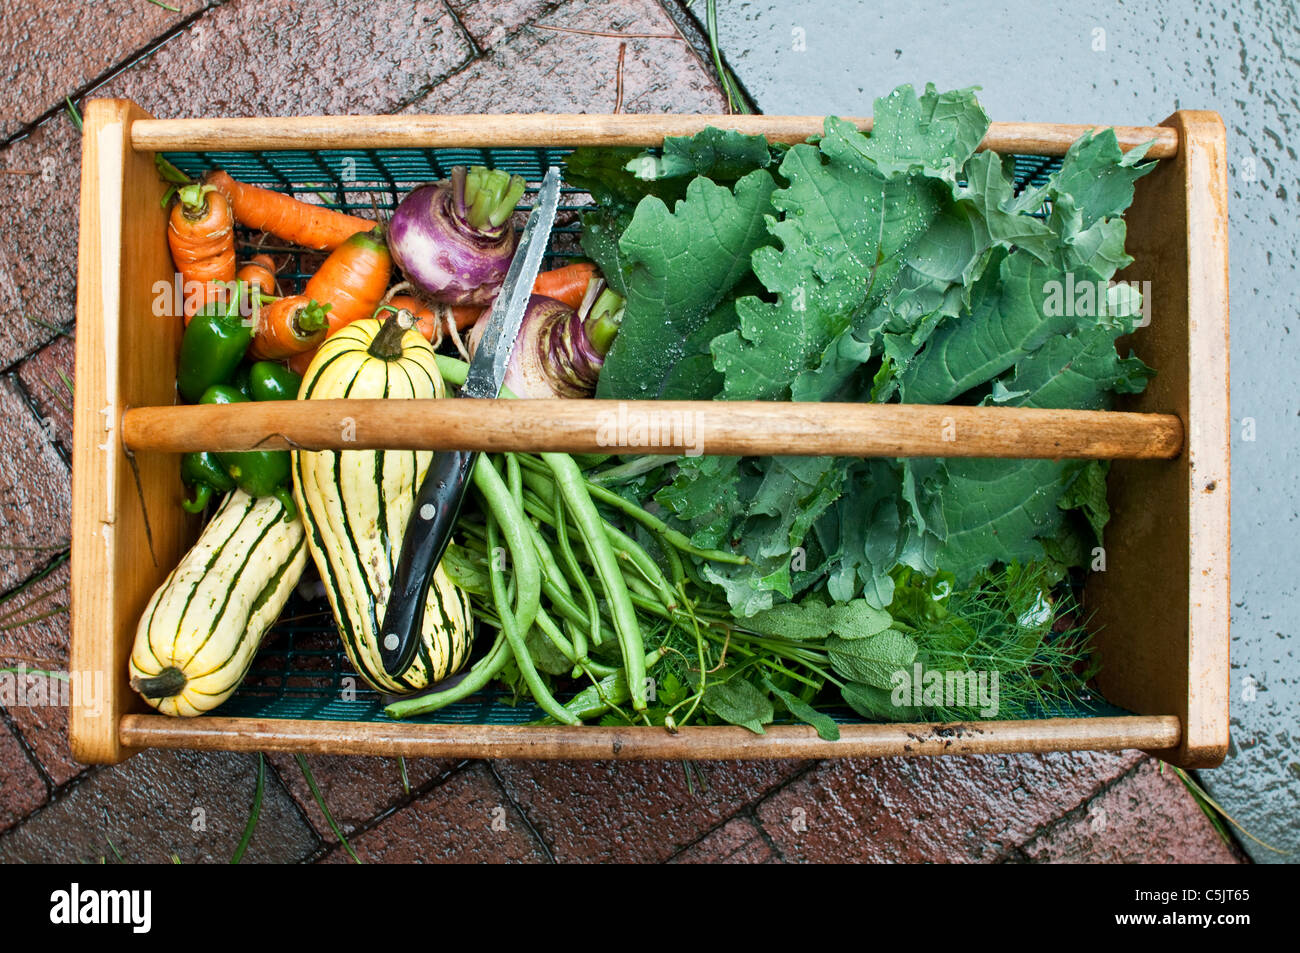 Carrots, jalapeno peppers, delicata squash, string beans, fresh herbs, kale and turnips in a garden hod. Stock Photo